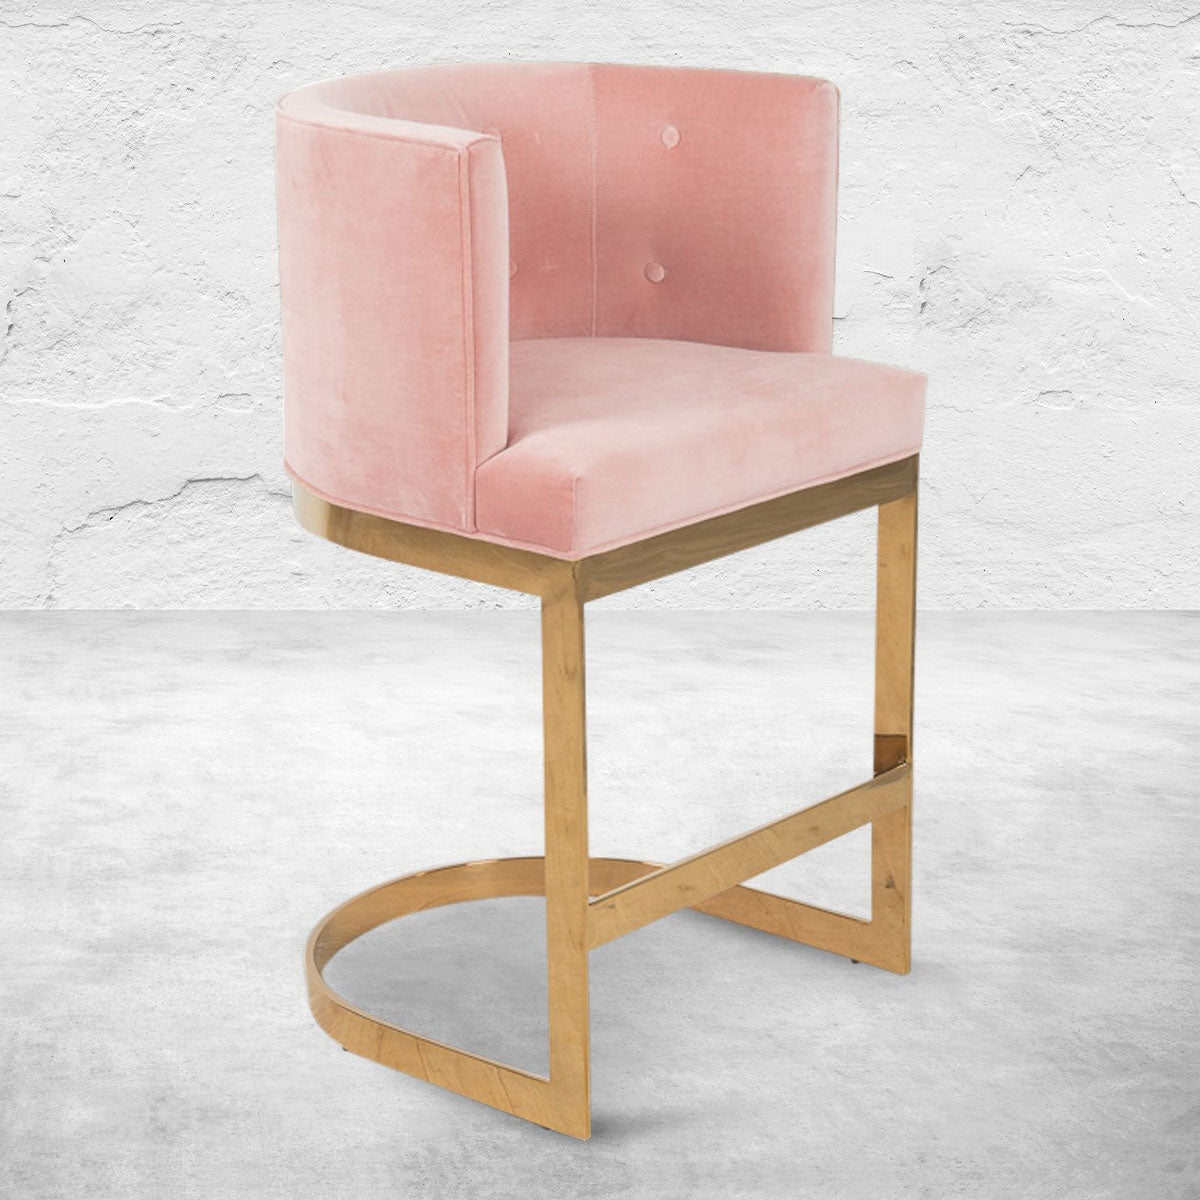 Art Deco style bar or counter stool with velvet blush upholstery, mid-rise back, button tufting and polished brass base.